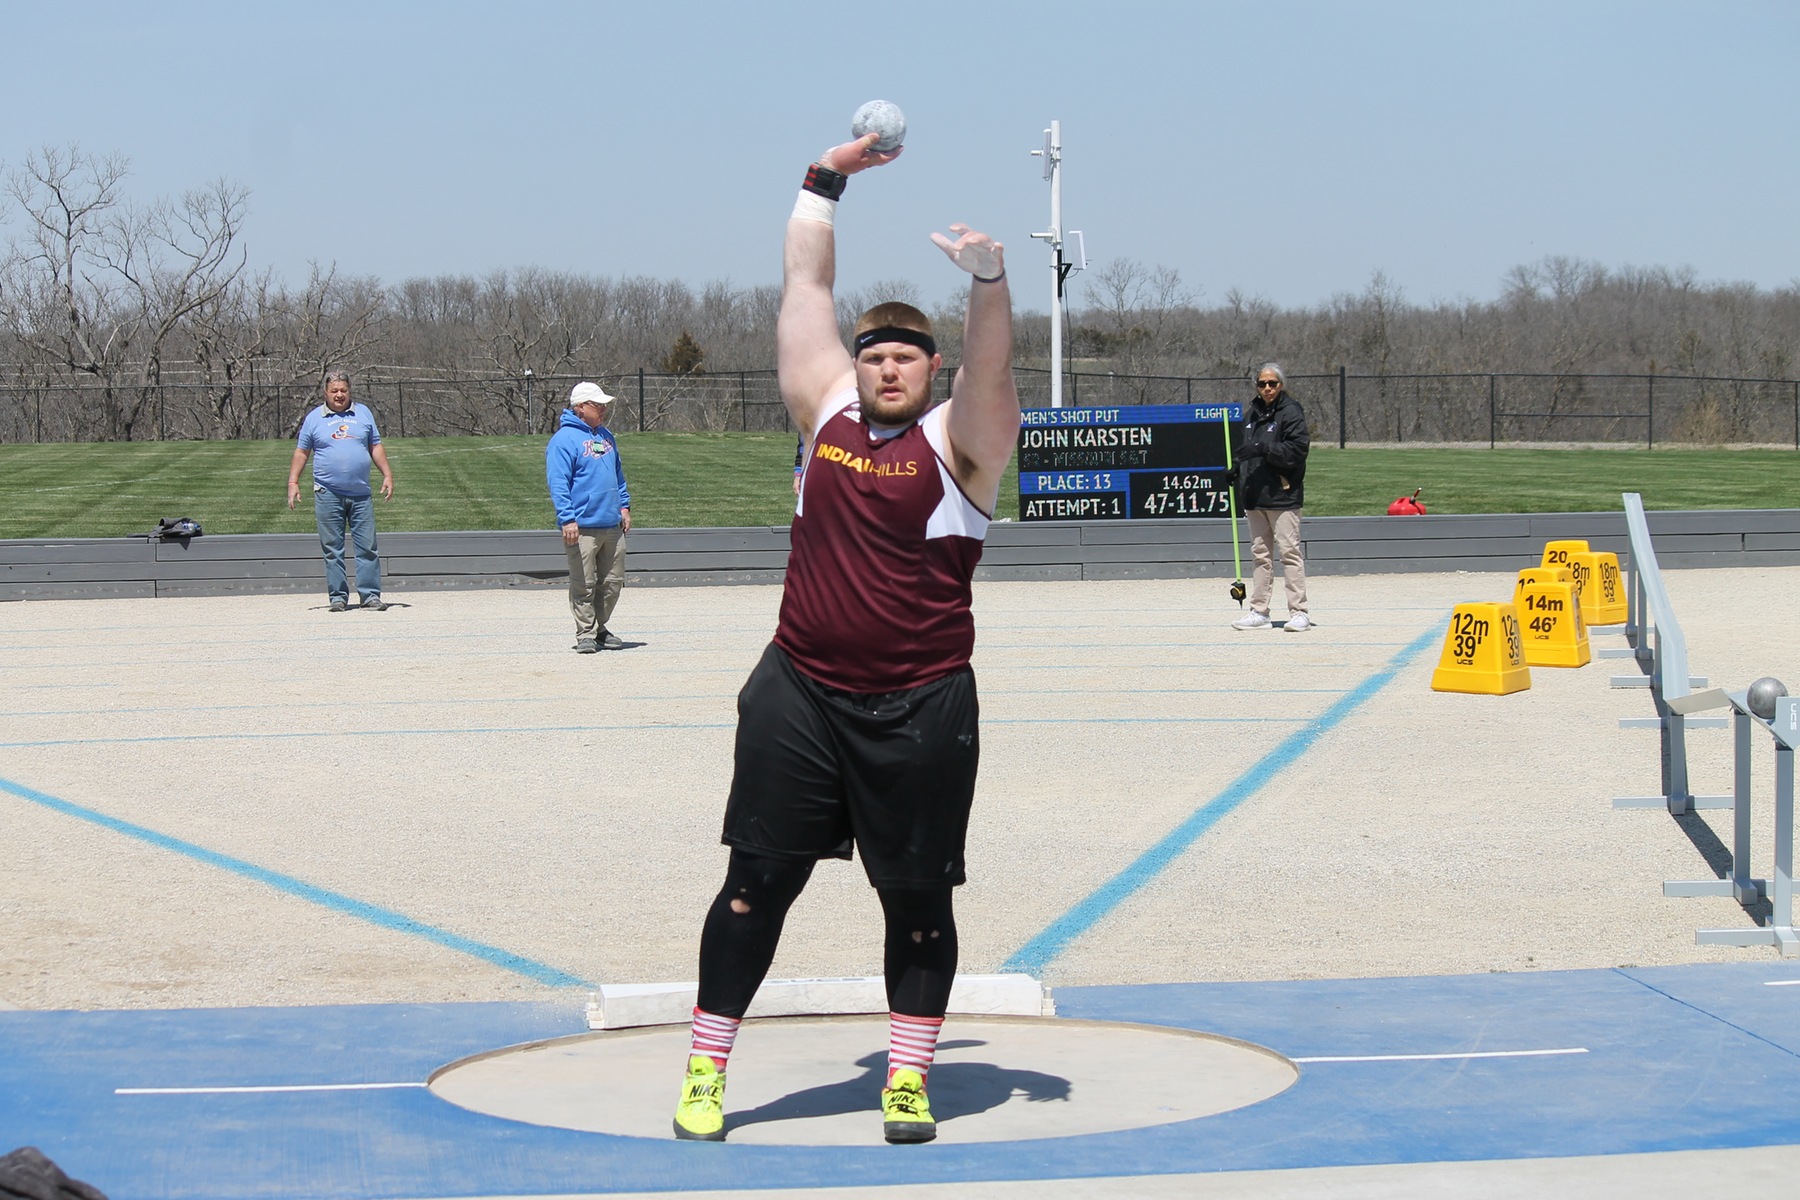 Nathan Winters placed fourth in the men's shot put at Kansas Relays.